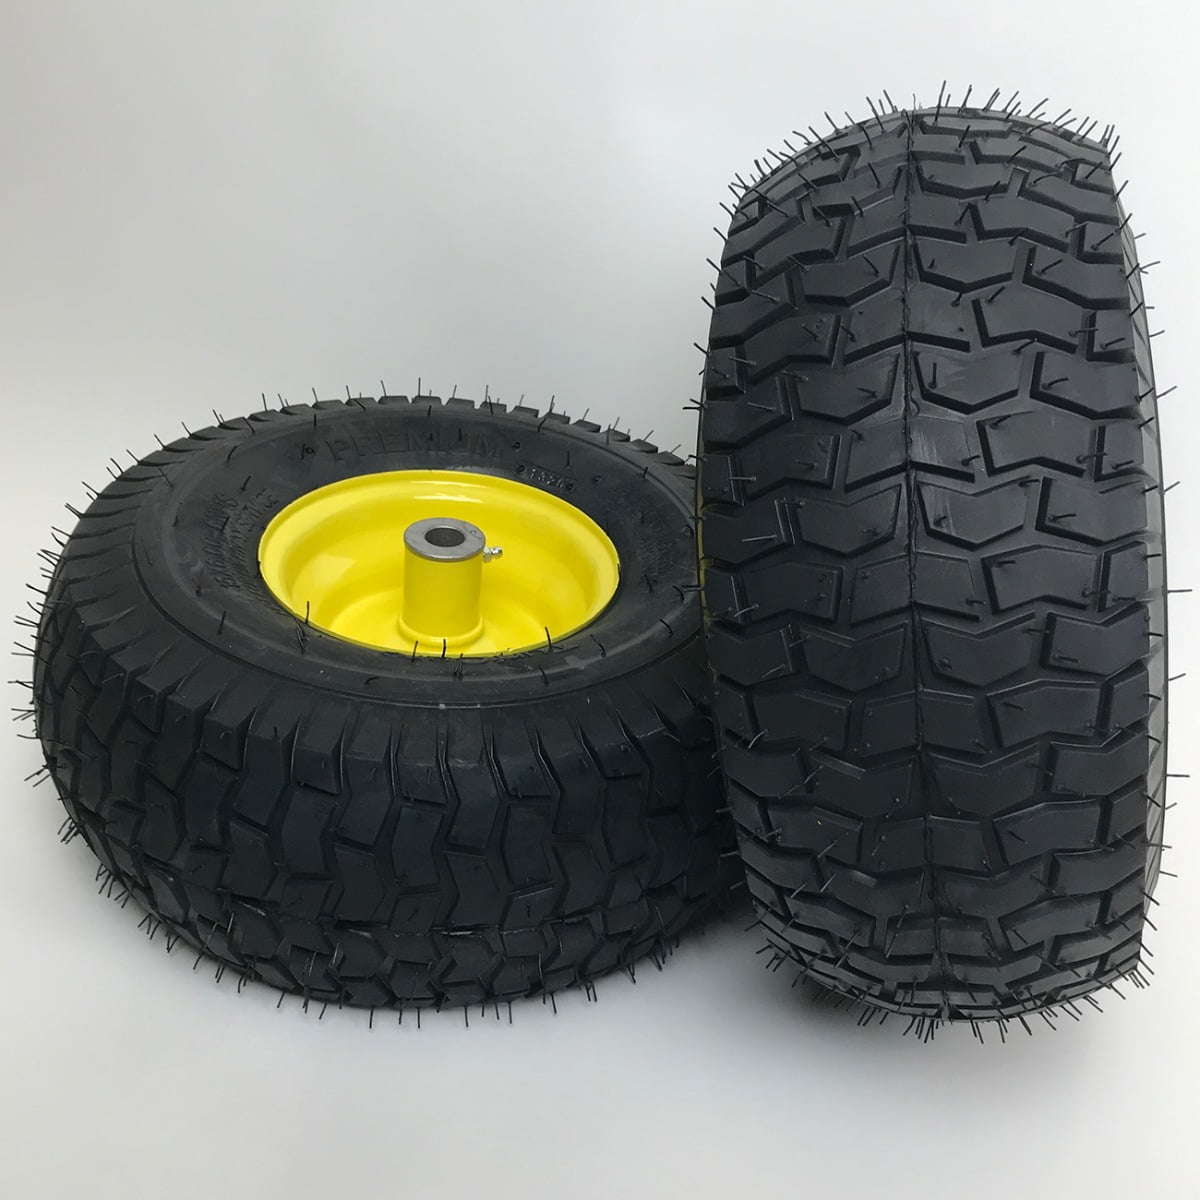 Set Of 2 15x6 00 6 Lawn Mower Tire And Rim Fits On 3 4 Inch Axle